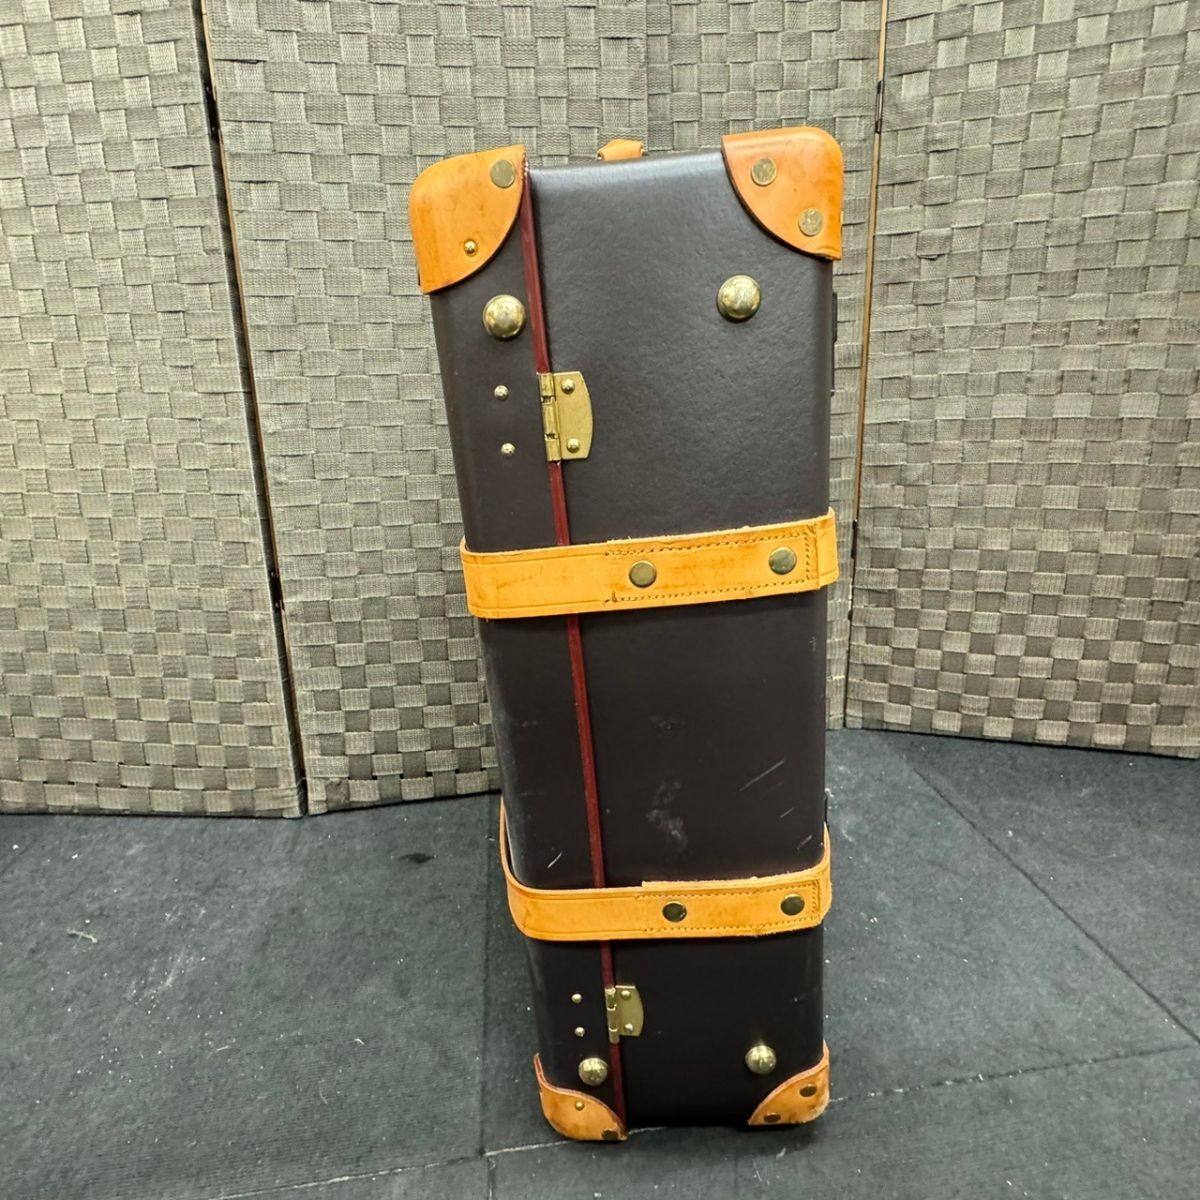 D810-K57-51 GLOBE TROTTER glove Toro ta- Carry case carry bag suitcase Brown key attaching approximately height 58× width 39× inset approximately 18cm⑥